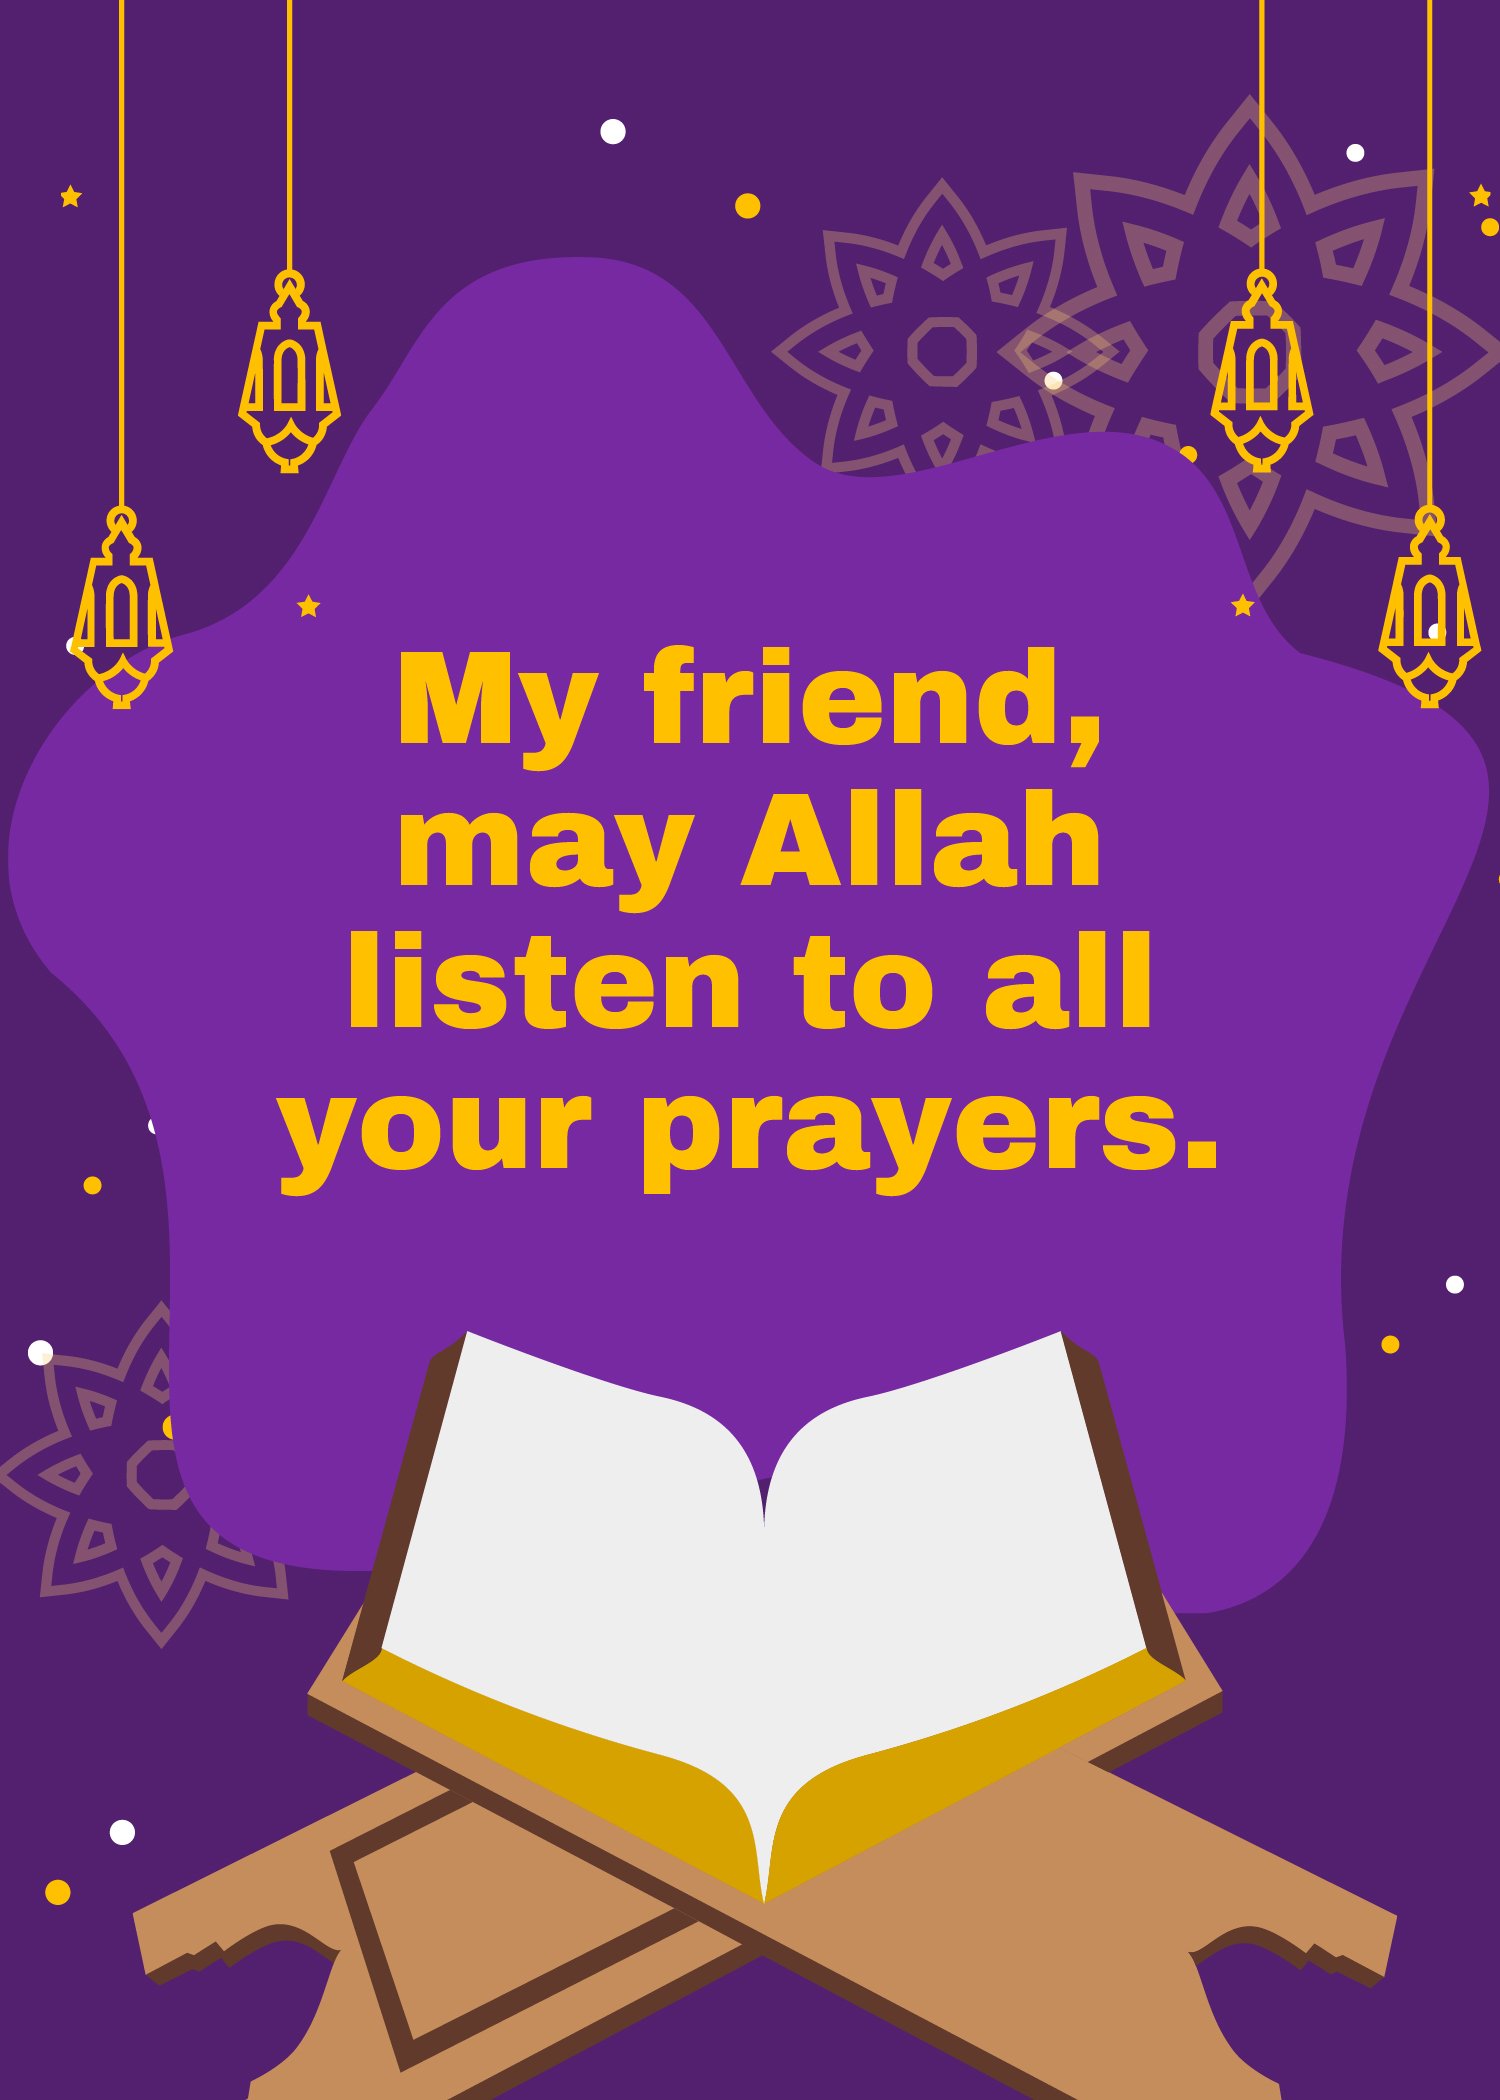 Free Ramadan Wishes For Friend in Word, Google Docs, Illustrator, PSD, EPS, SVG, JPG, PNG